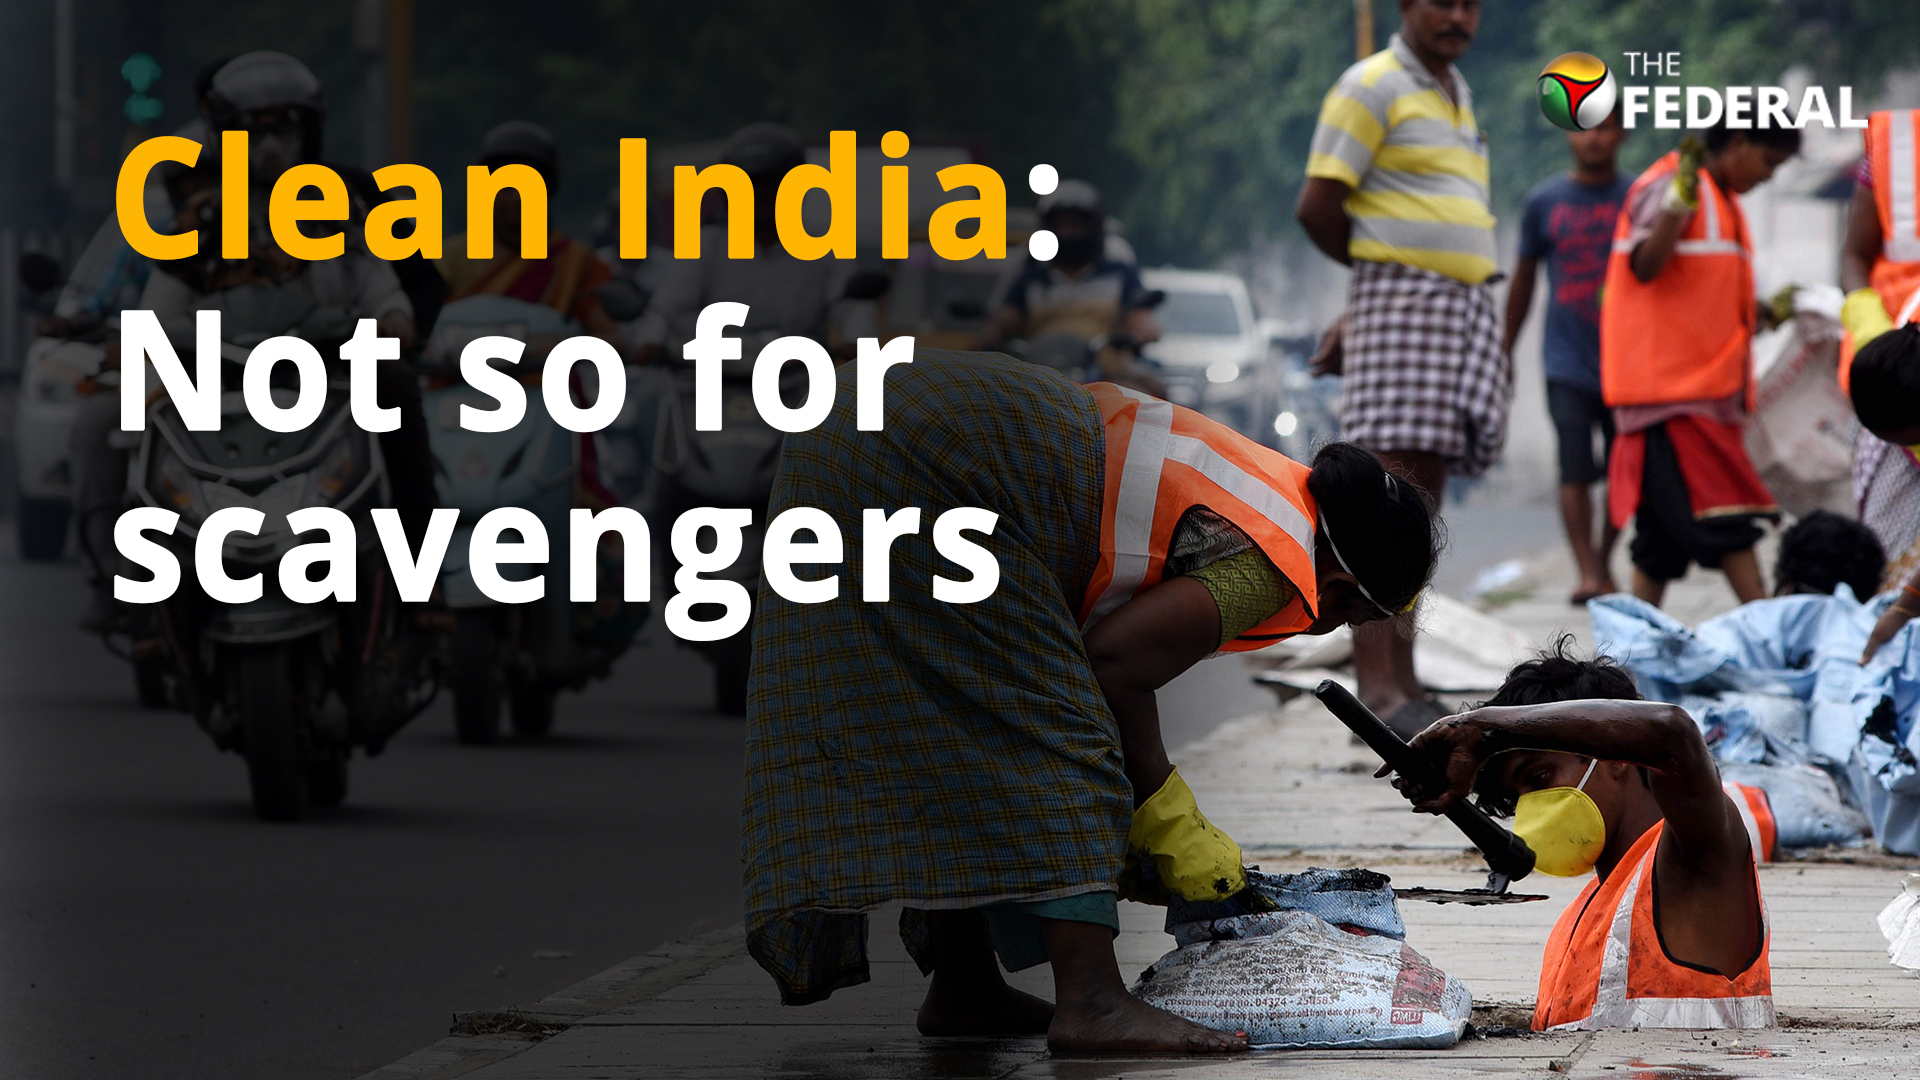 How Swachh Bharat makes life worse for scavengers